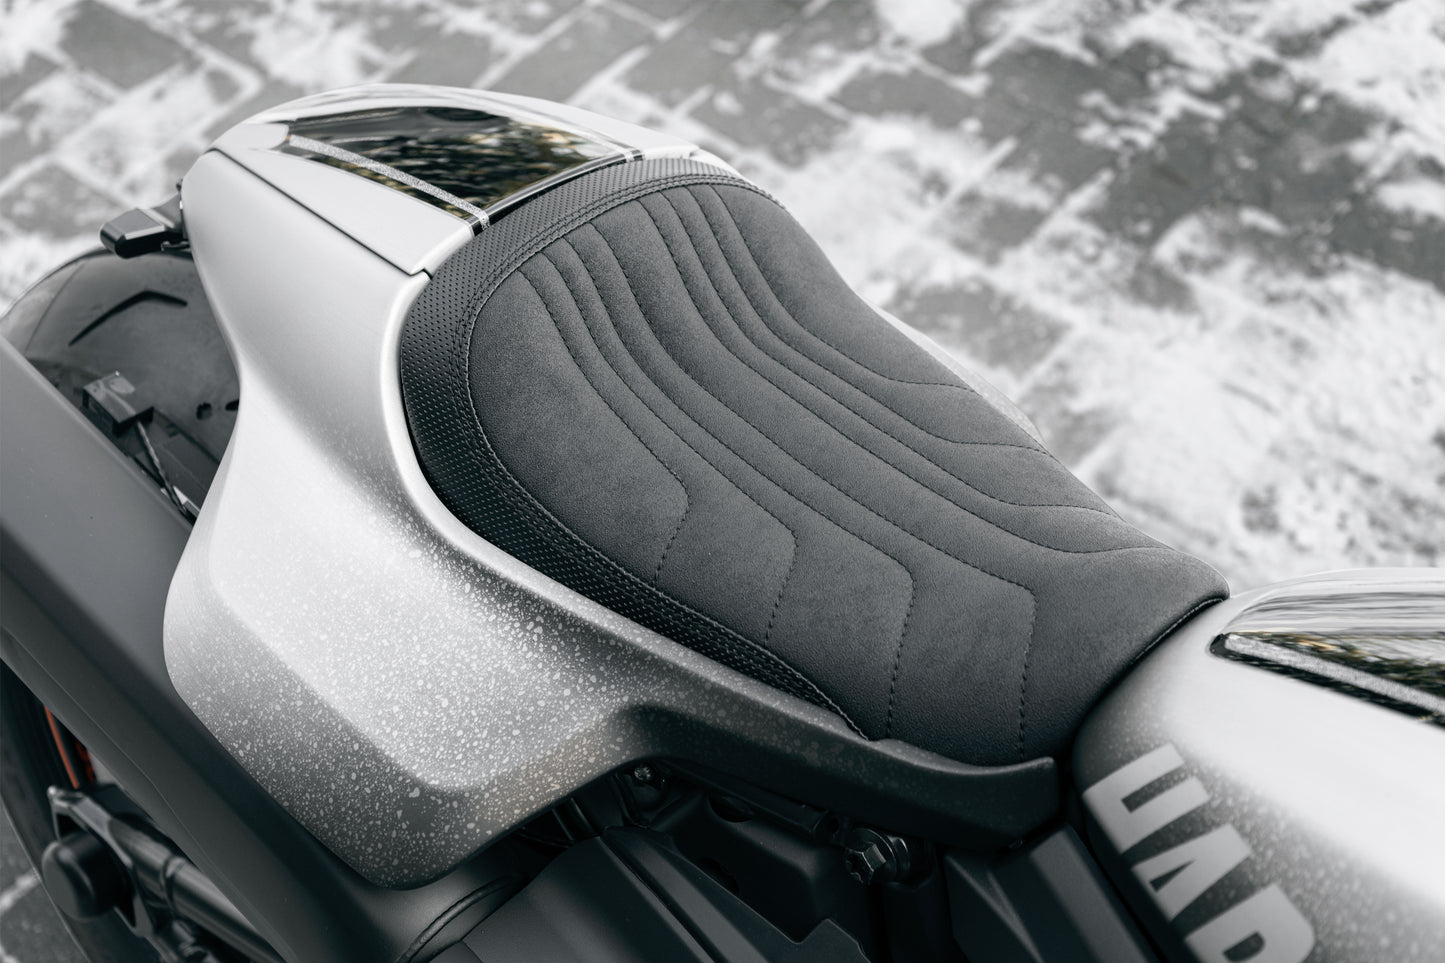 2021-Later Sportster S "Sporty" Seat